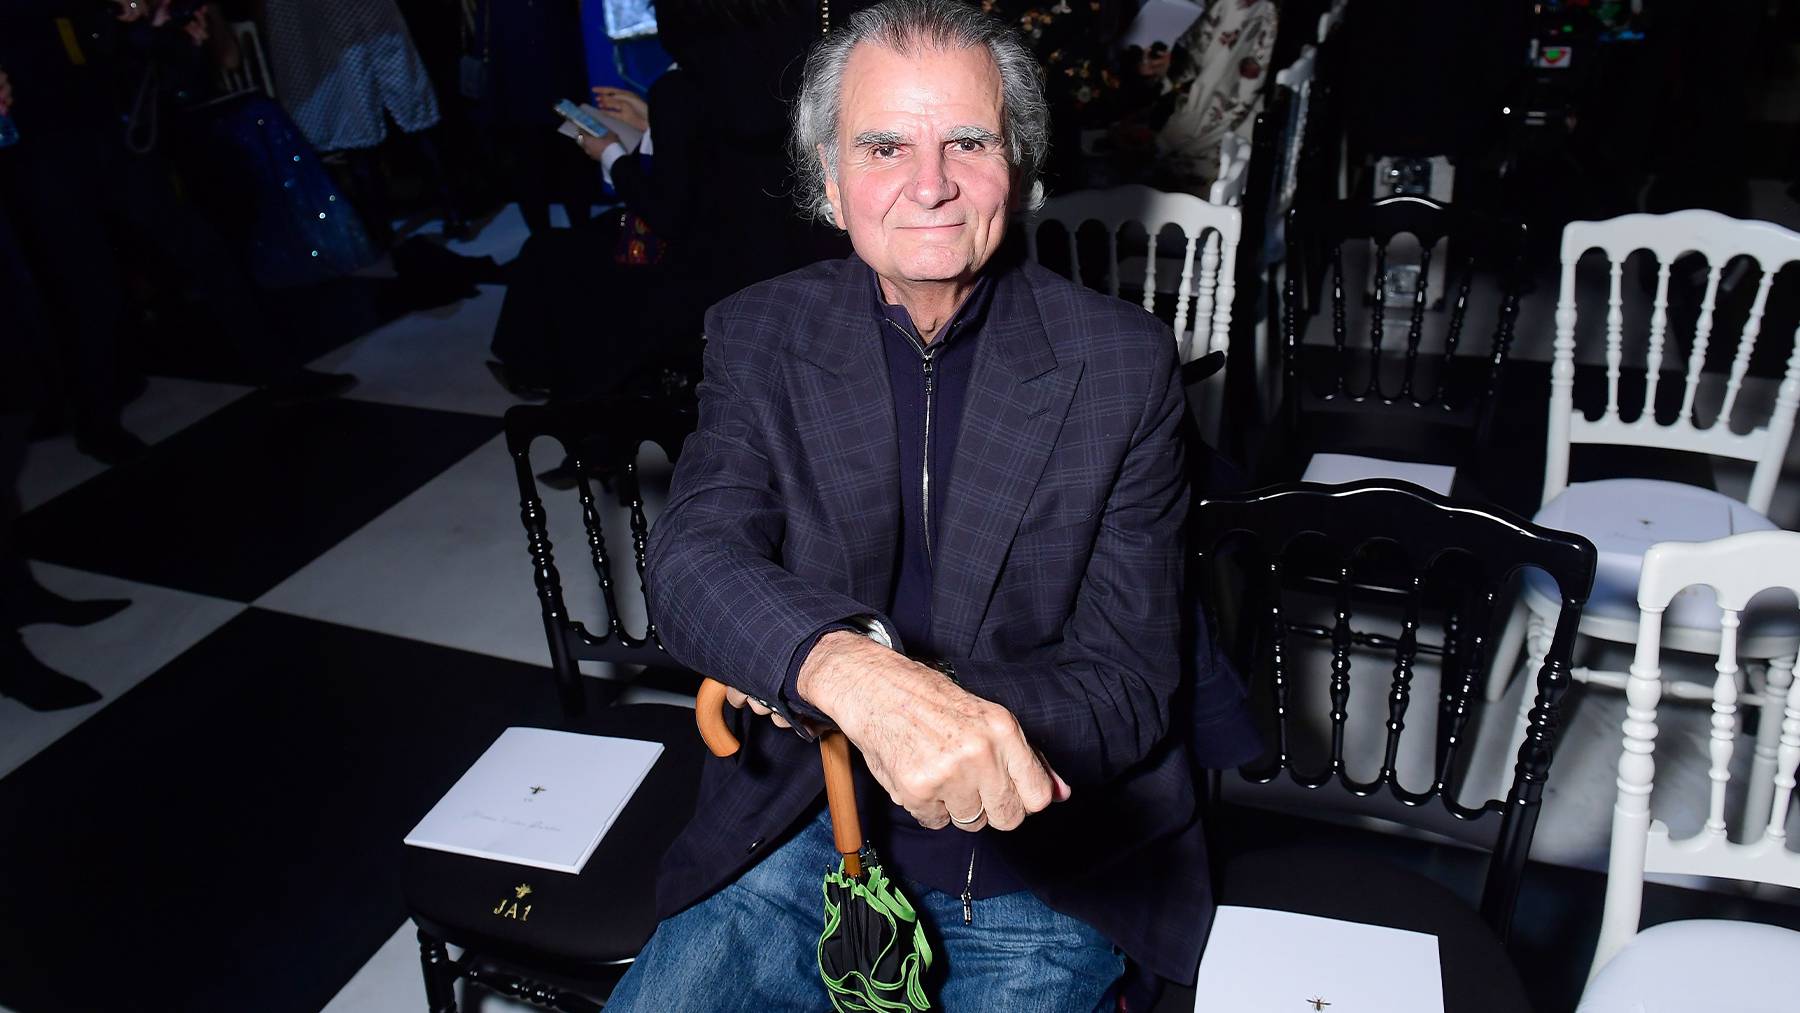 Photographer Patrick Demarchelier has died, aged 78.